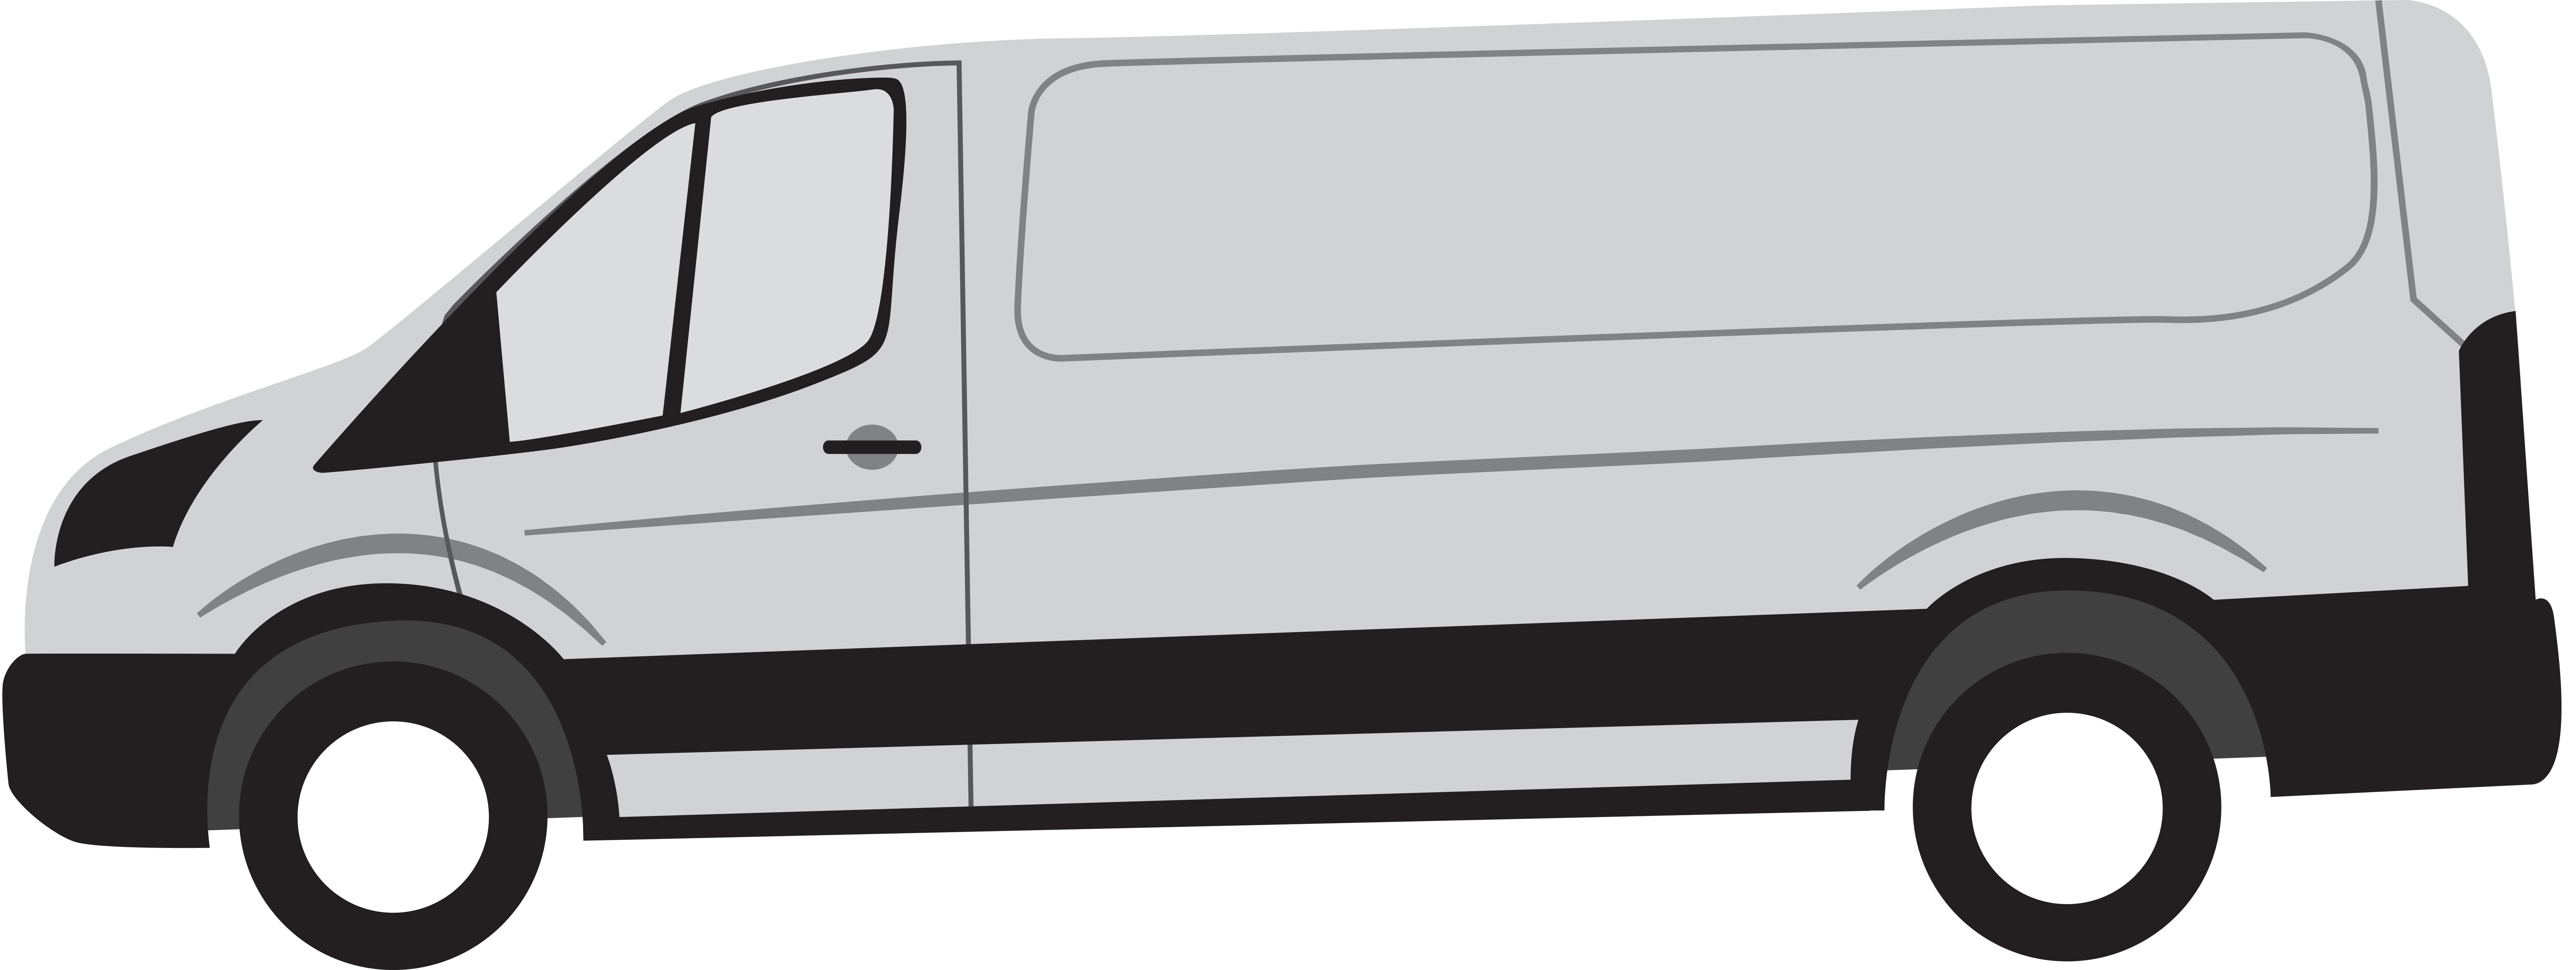 148WB Low Roof FORD TRANSIT CARGO VAN EQUIPMENT